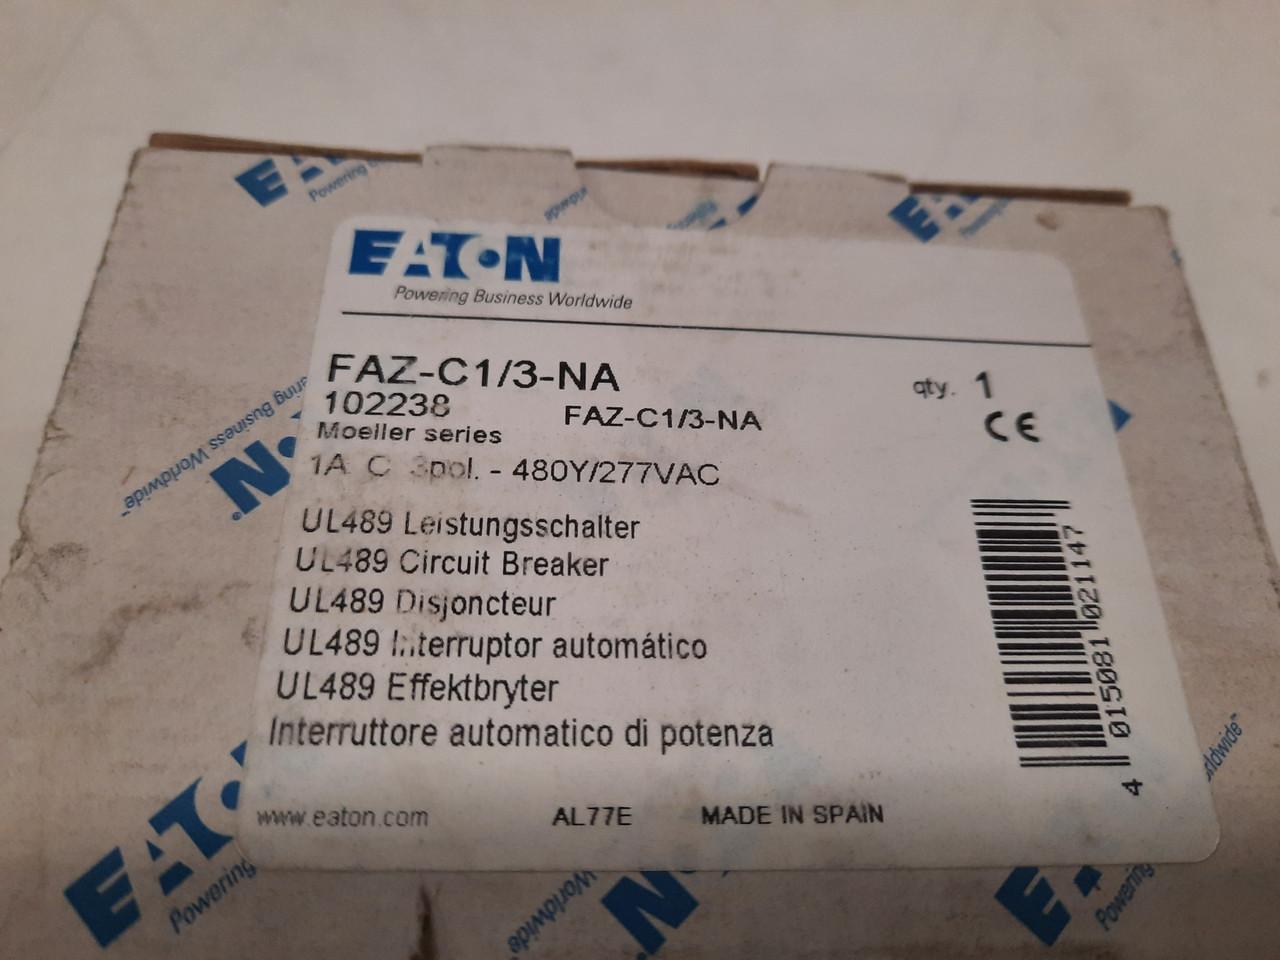 Eaton FAZ-C1/3-NA 277/480 VAC 50/60 Hz, 1 A, 3-Pole, 10/14 kA, 5 to 10 x Rated Current, Screw Terminal, DIN Rail Mount, Standard Packaging, C-Curve, Current Limiting, Thermal Magnetic